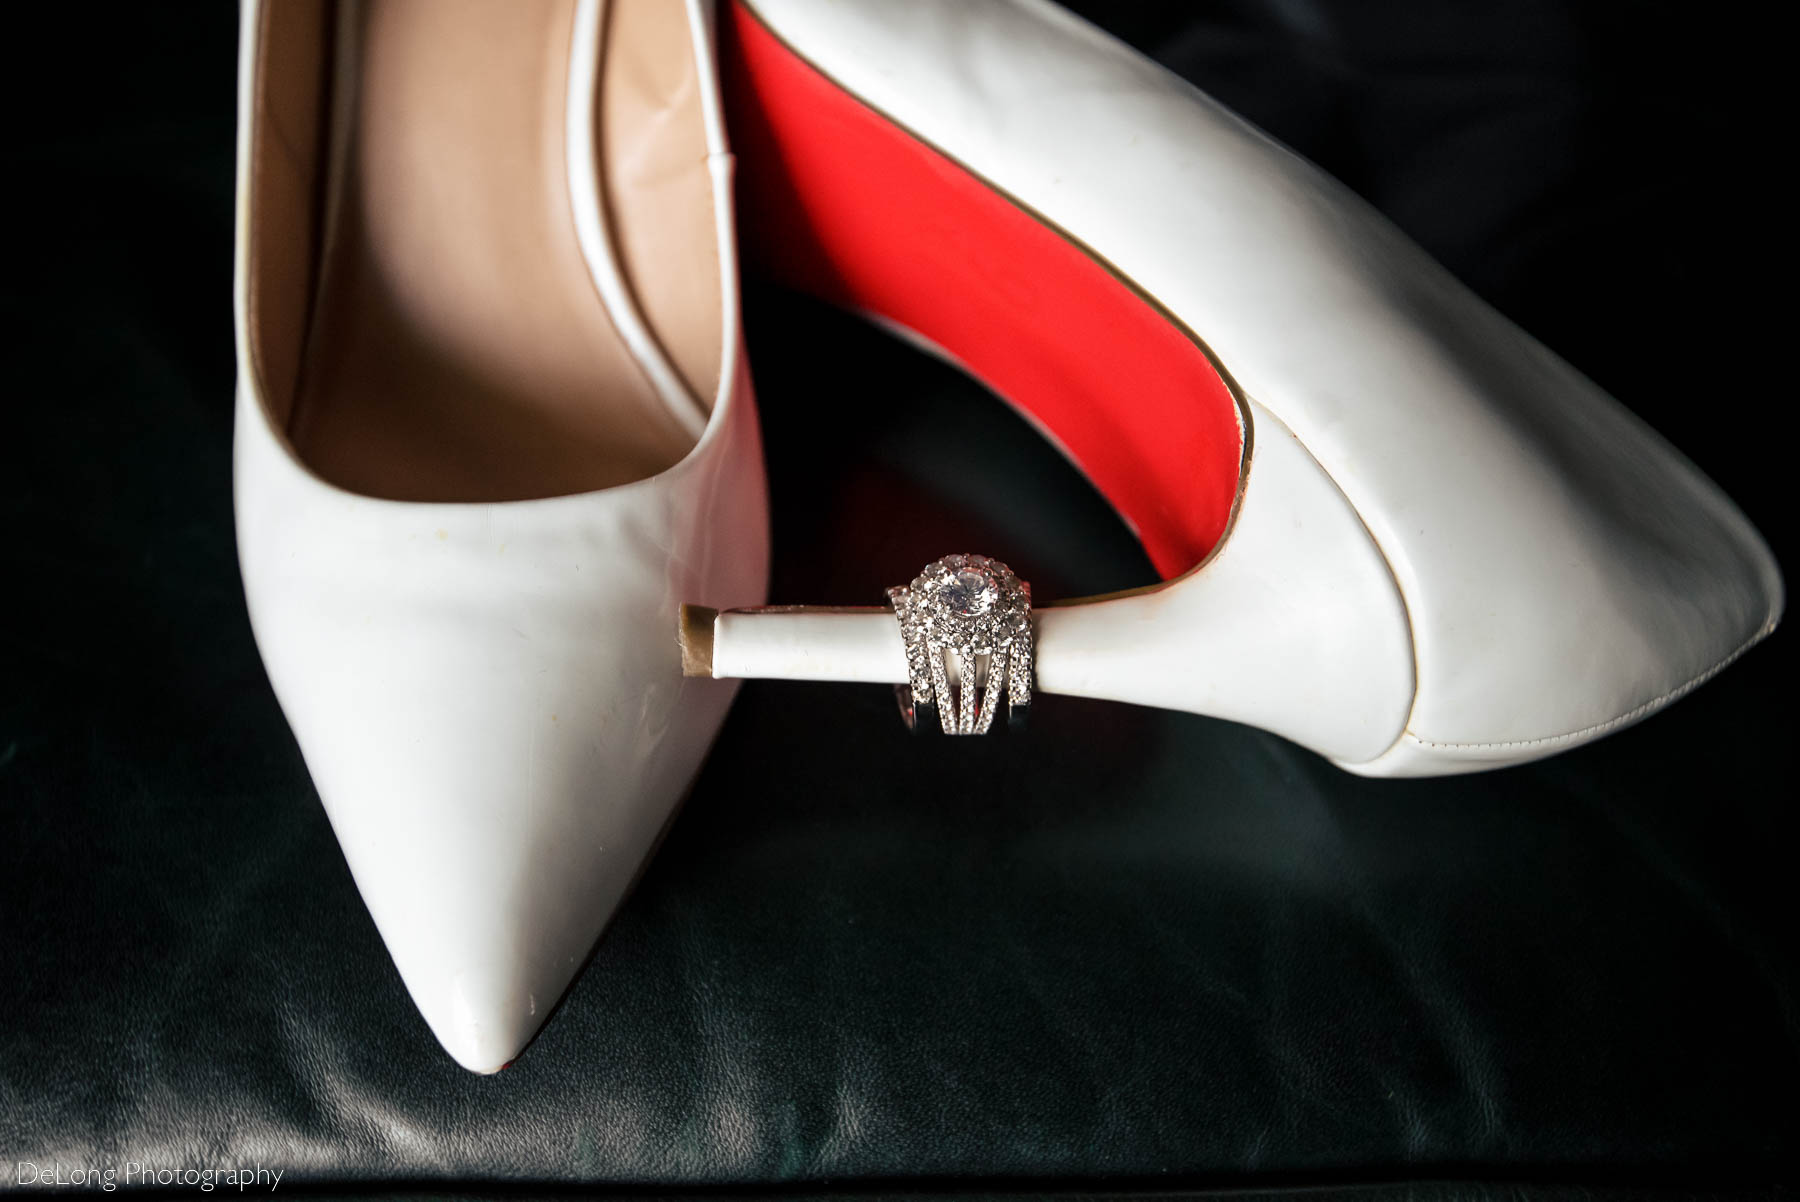 The bride's Christian Louboutin white leather stilettos with her engagement ring and wedding bands on one of the heels at the Ballantyne Hotel by Charlotte wedding photographers DeLong Photography 